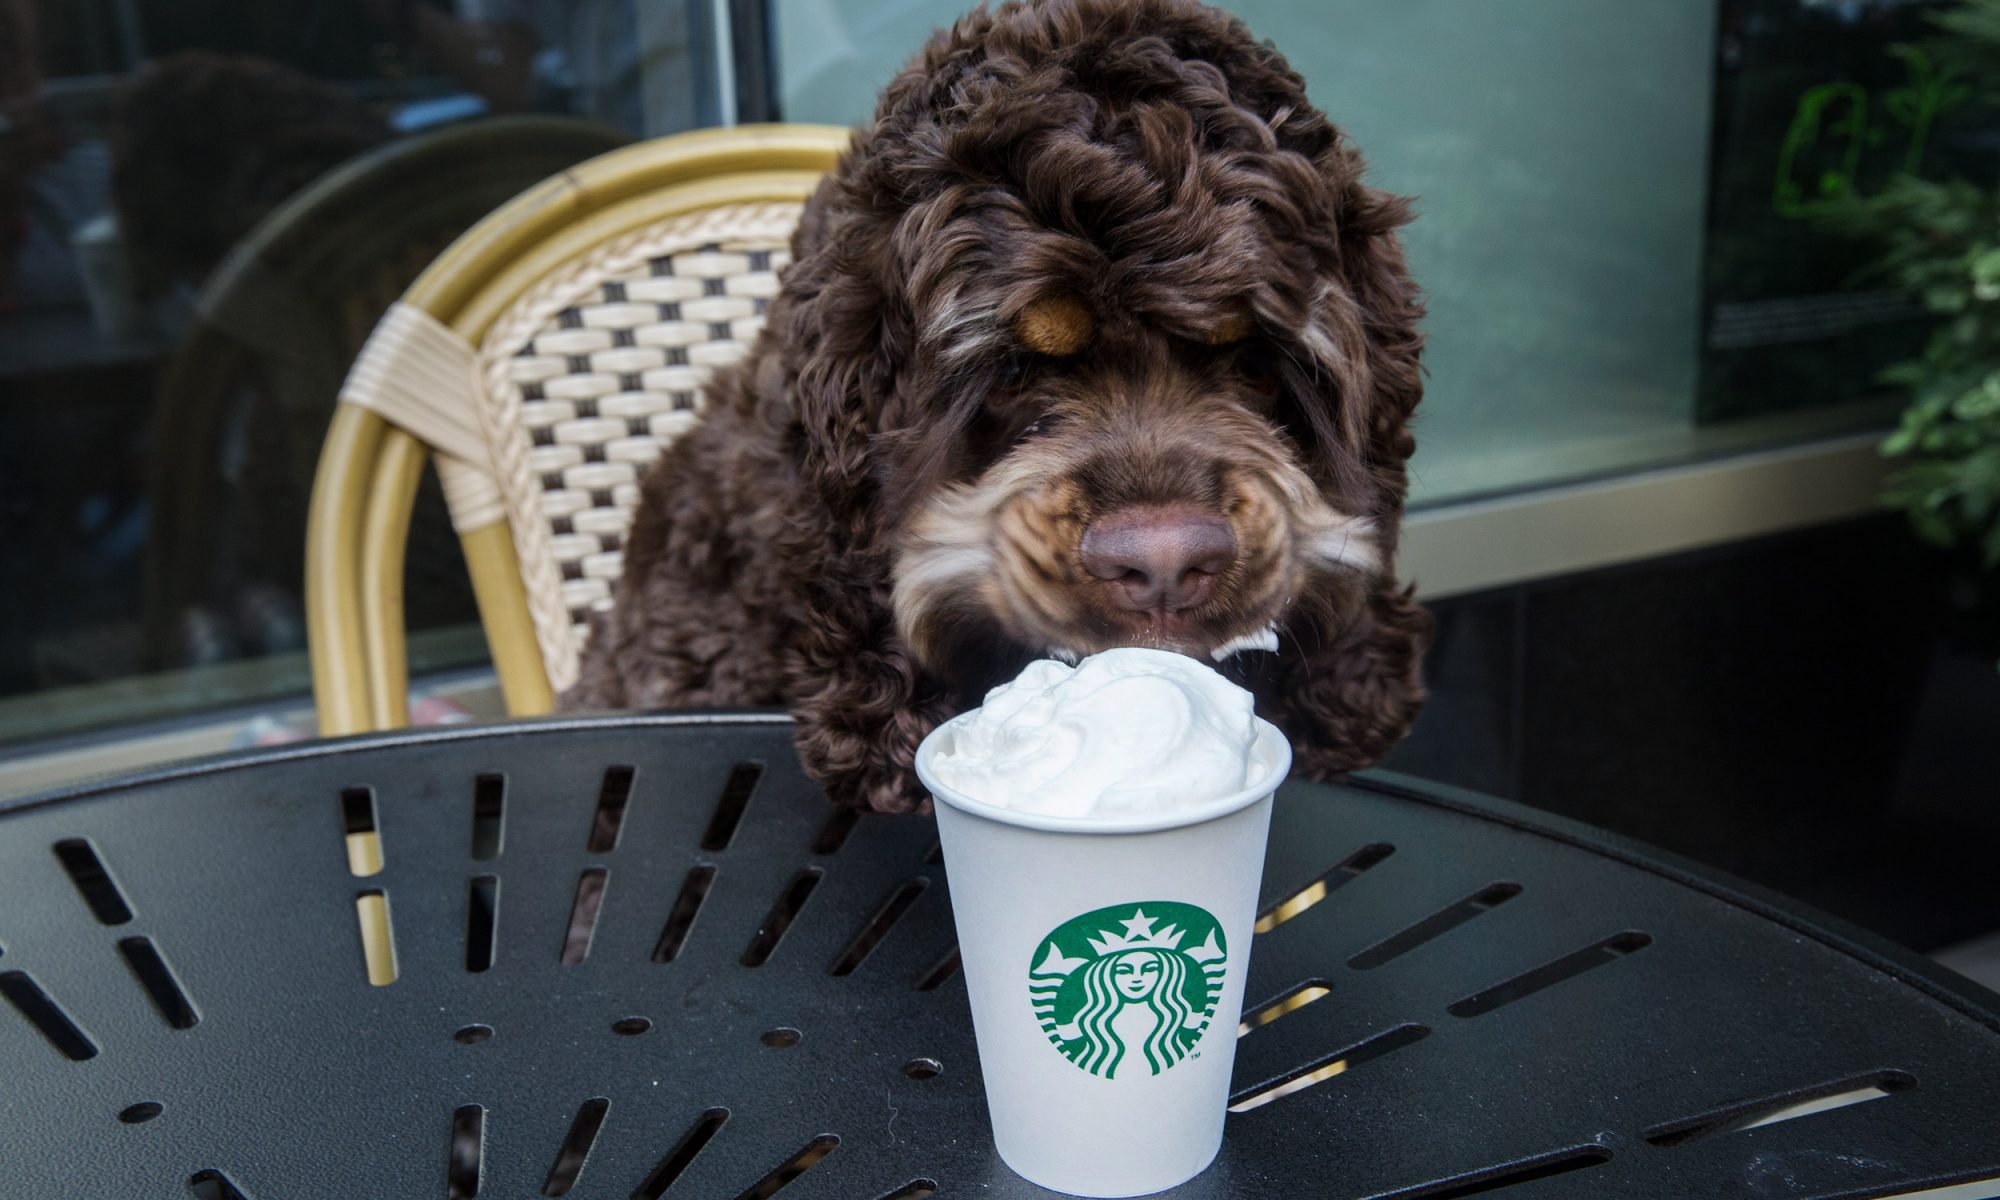 The Starbucks Puppuccino Is Your Dog's New Favorite Drink | MyRecipes